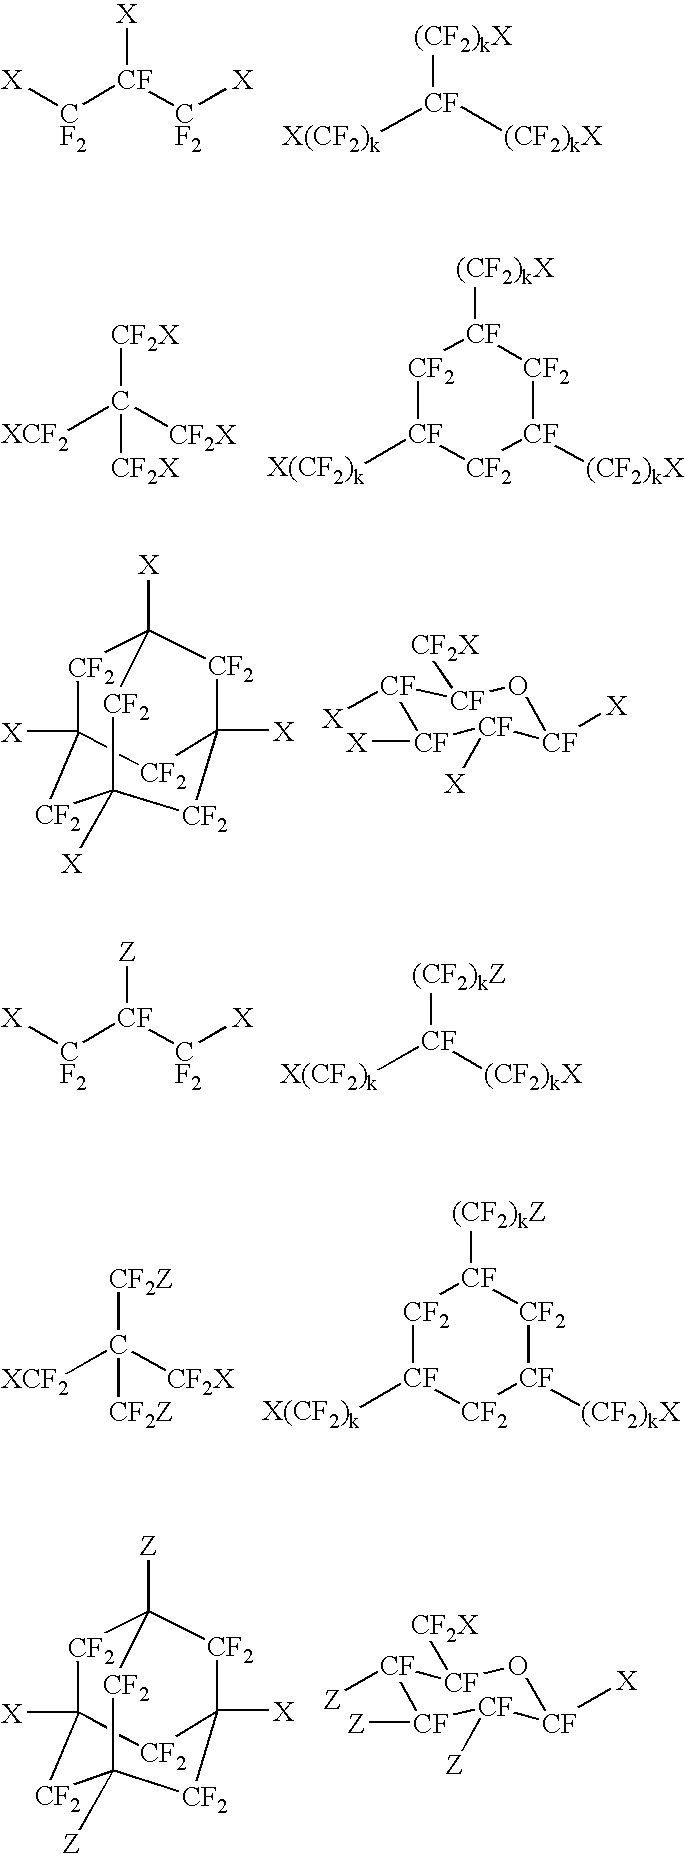 Fluoropolyether compound